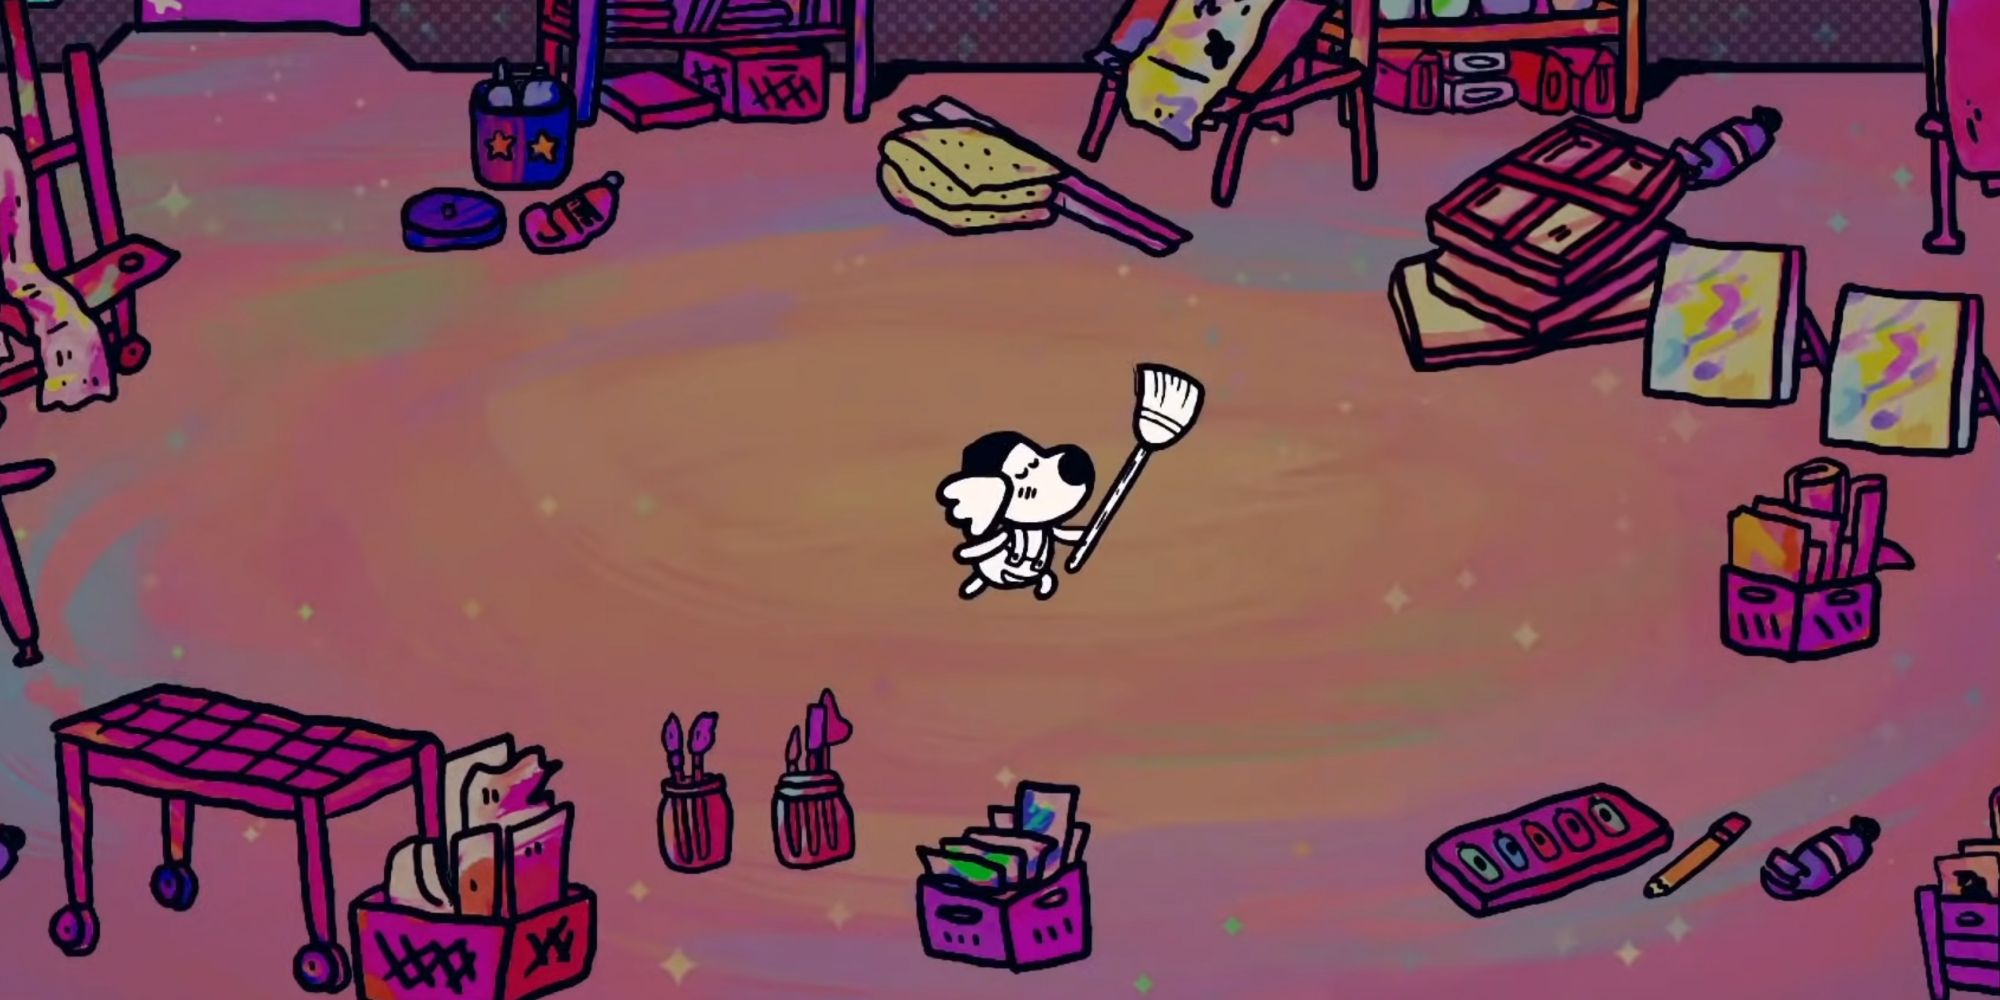 A screenshot from Chicory, showing the player character sweeping their broom while fantasizing about painting the world in a rainbow of colors